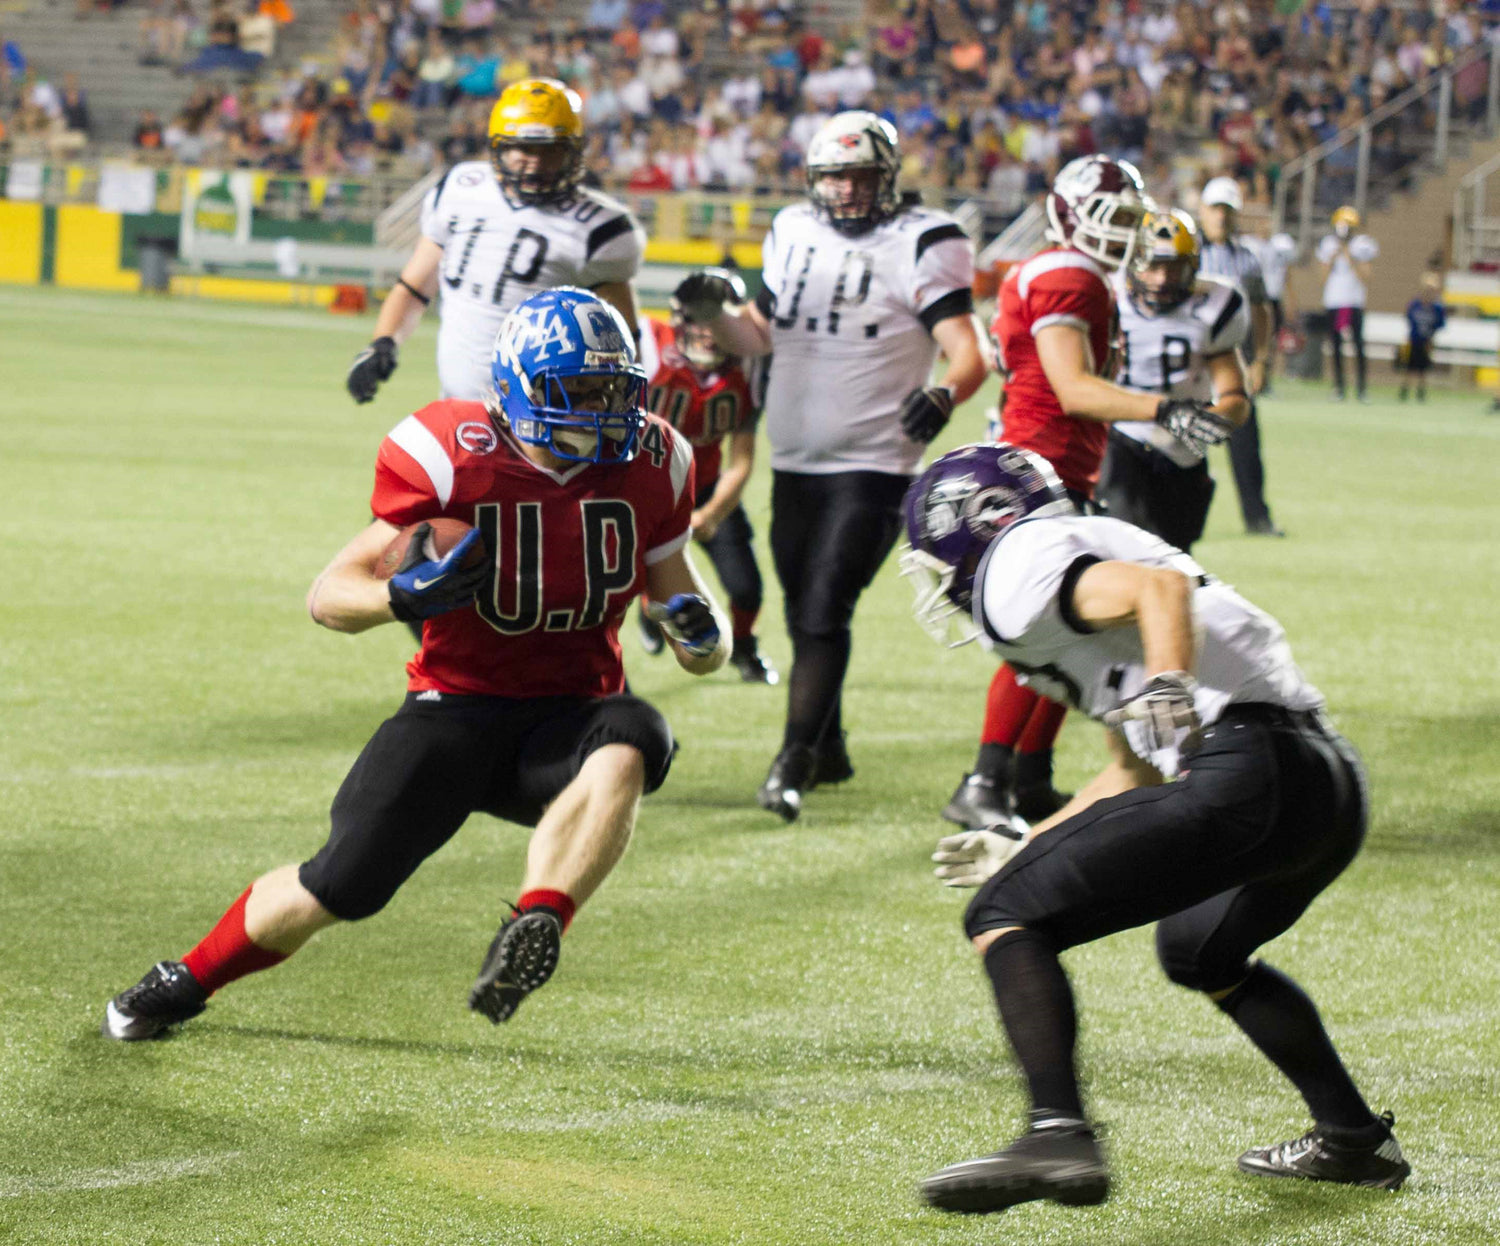 football player running with the ball while the defender attempts to stop a touchdown